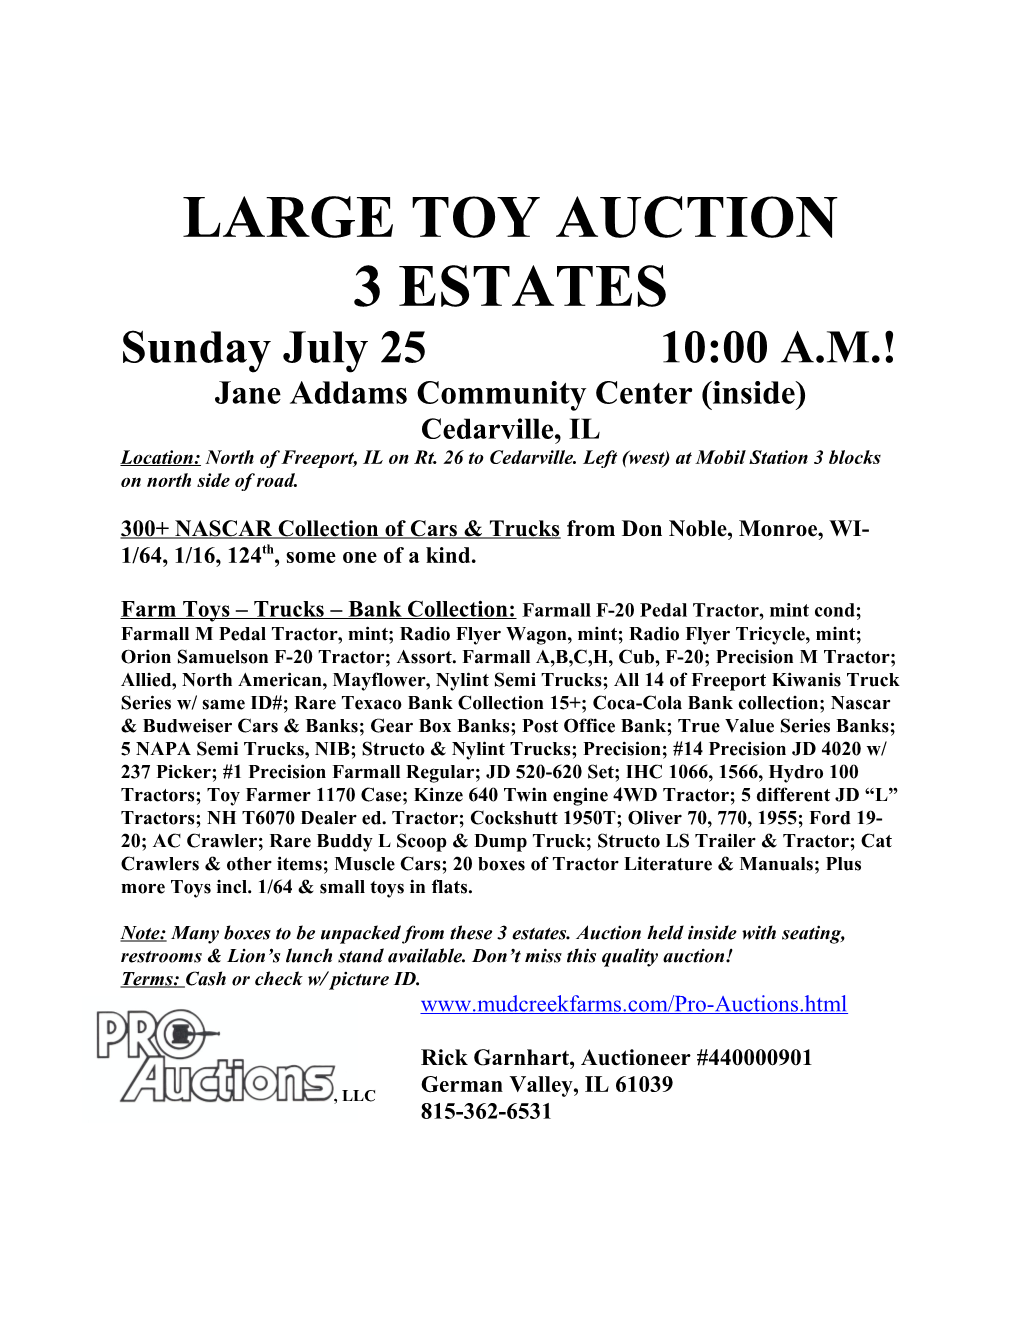 Large Toy Auction